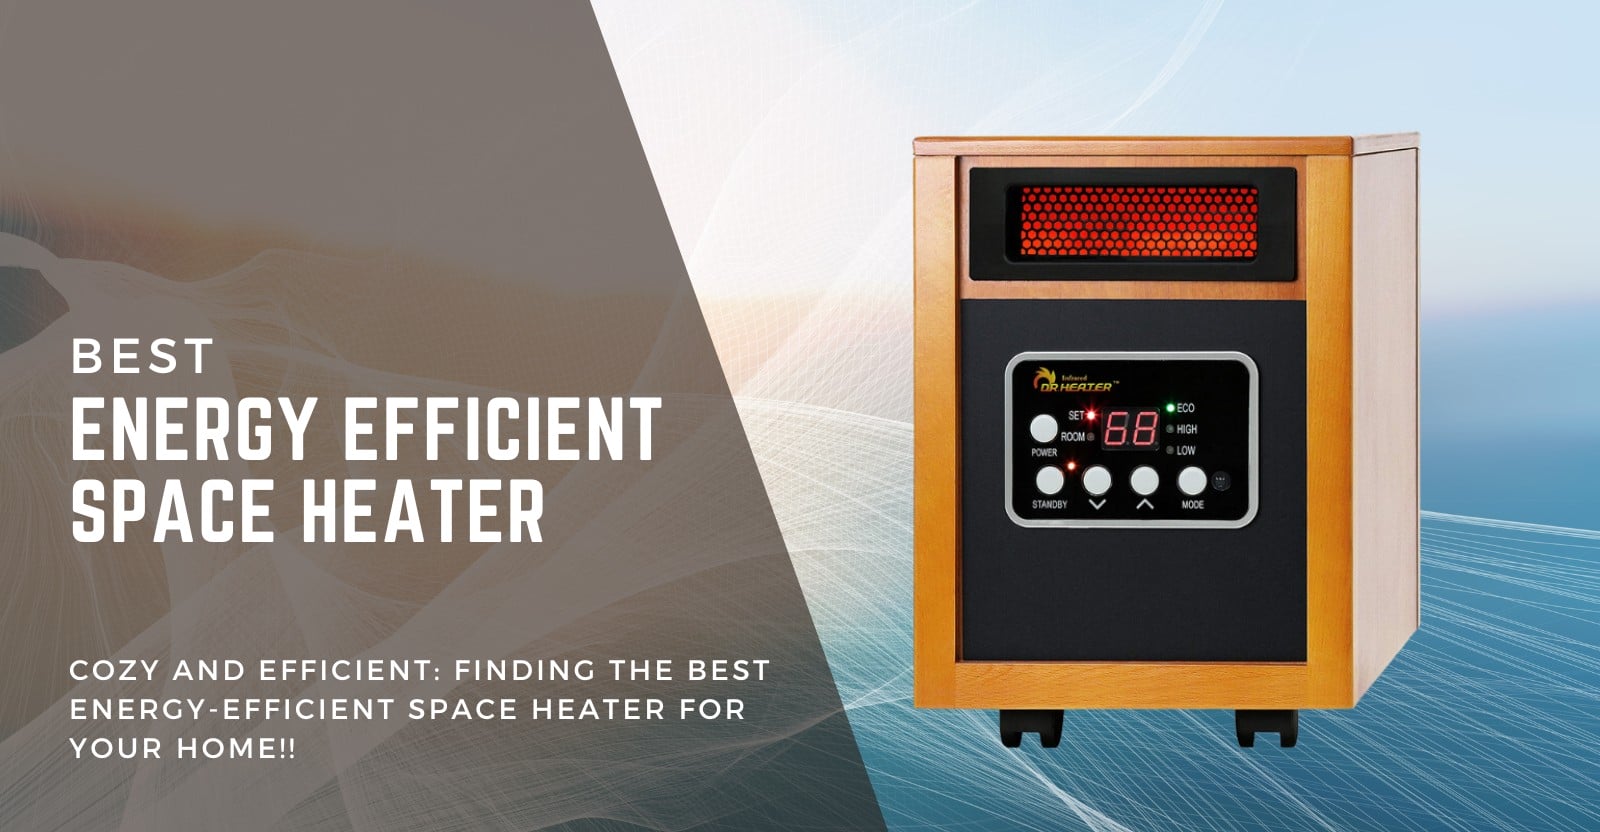 Best Energy Efficient Space Heater Review